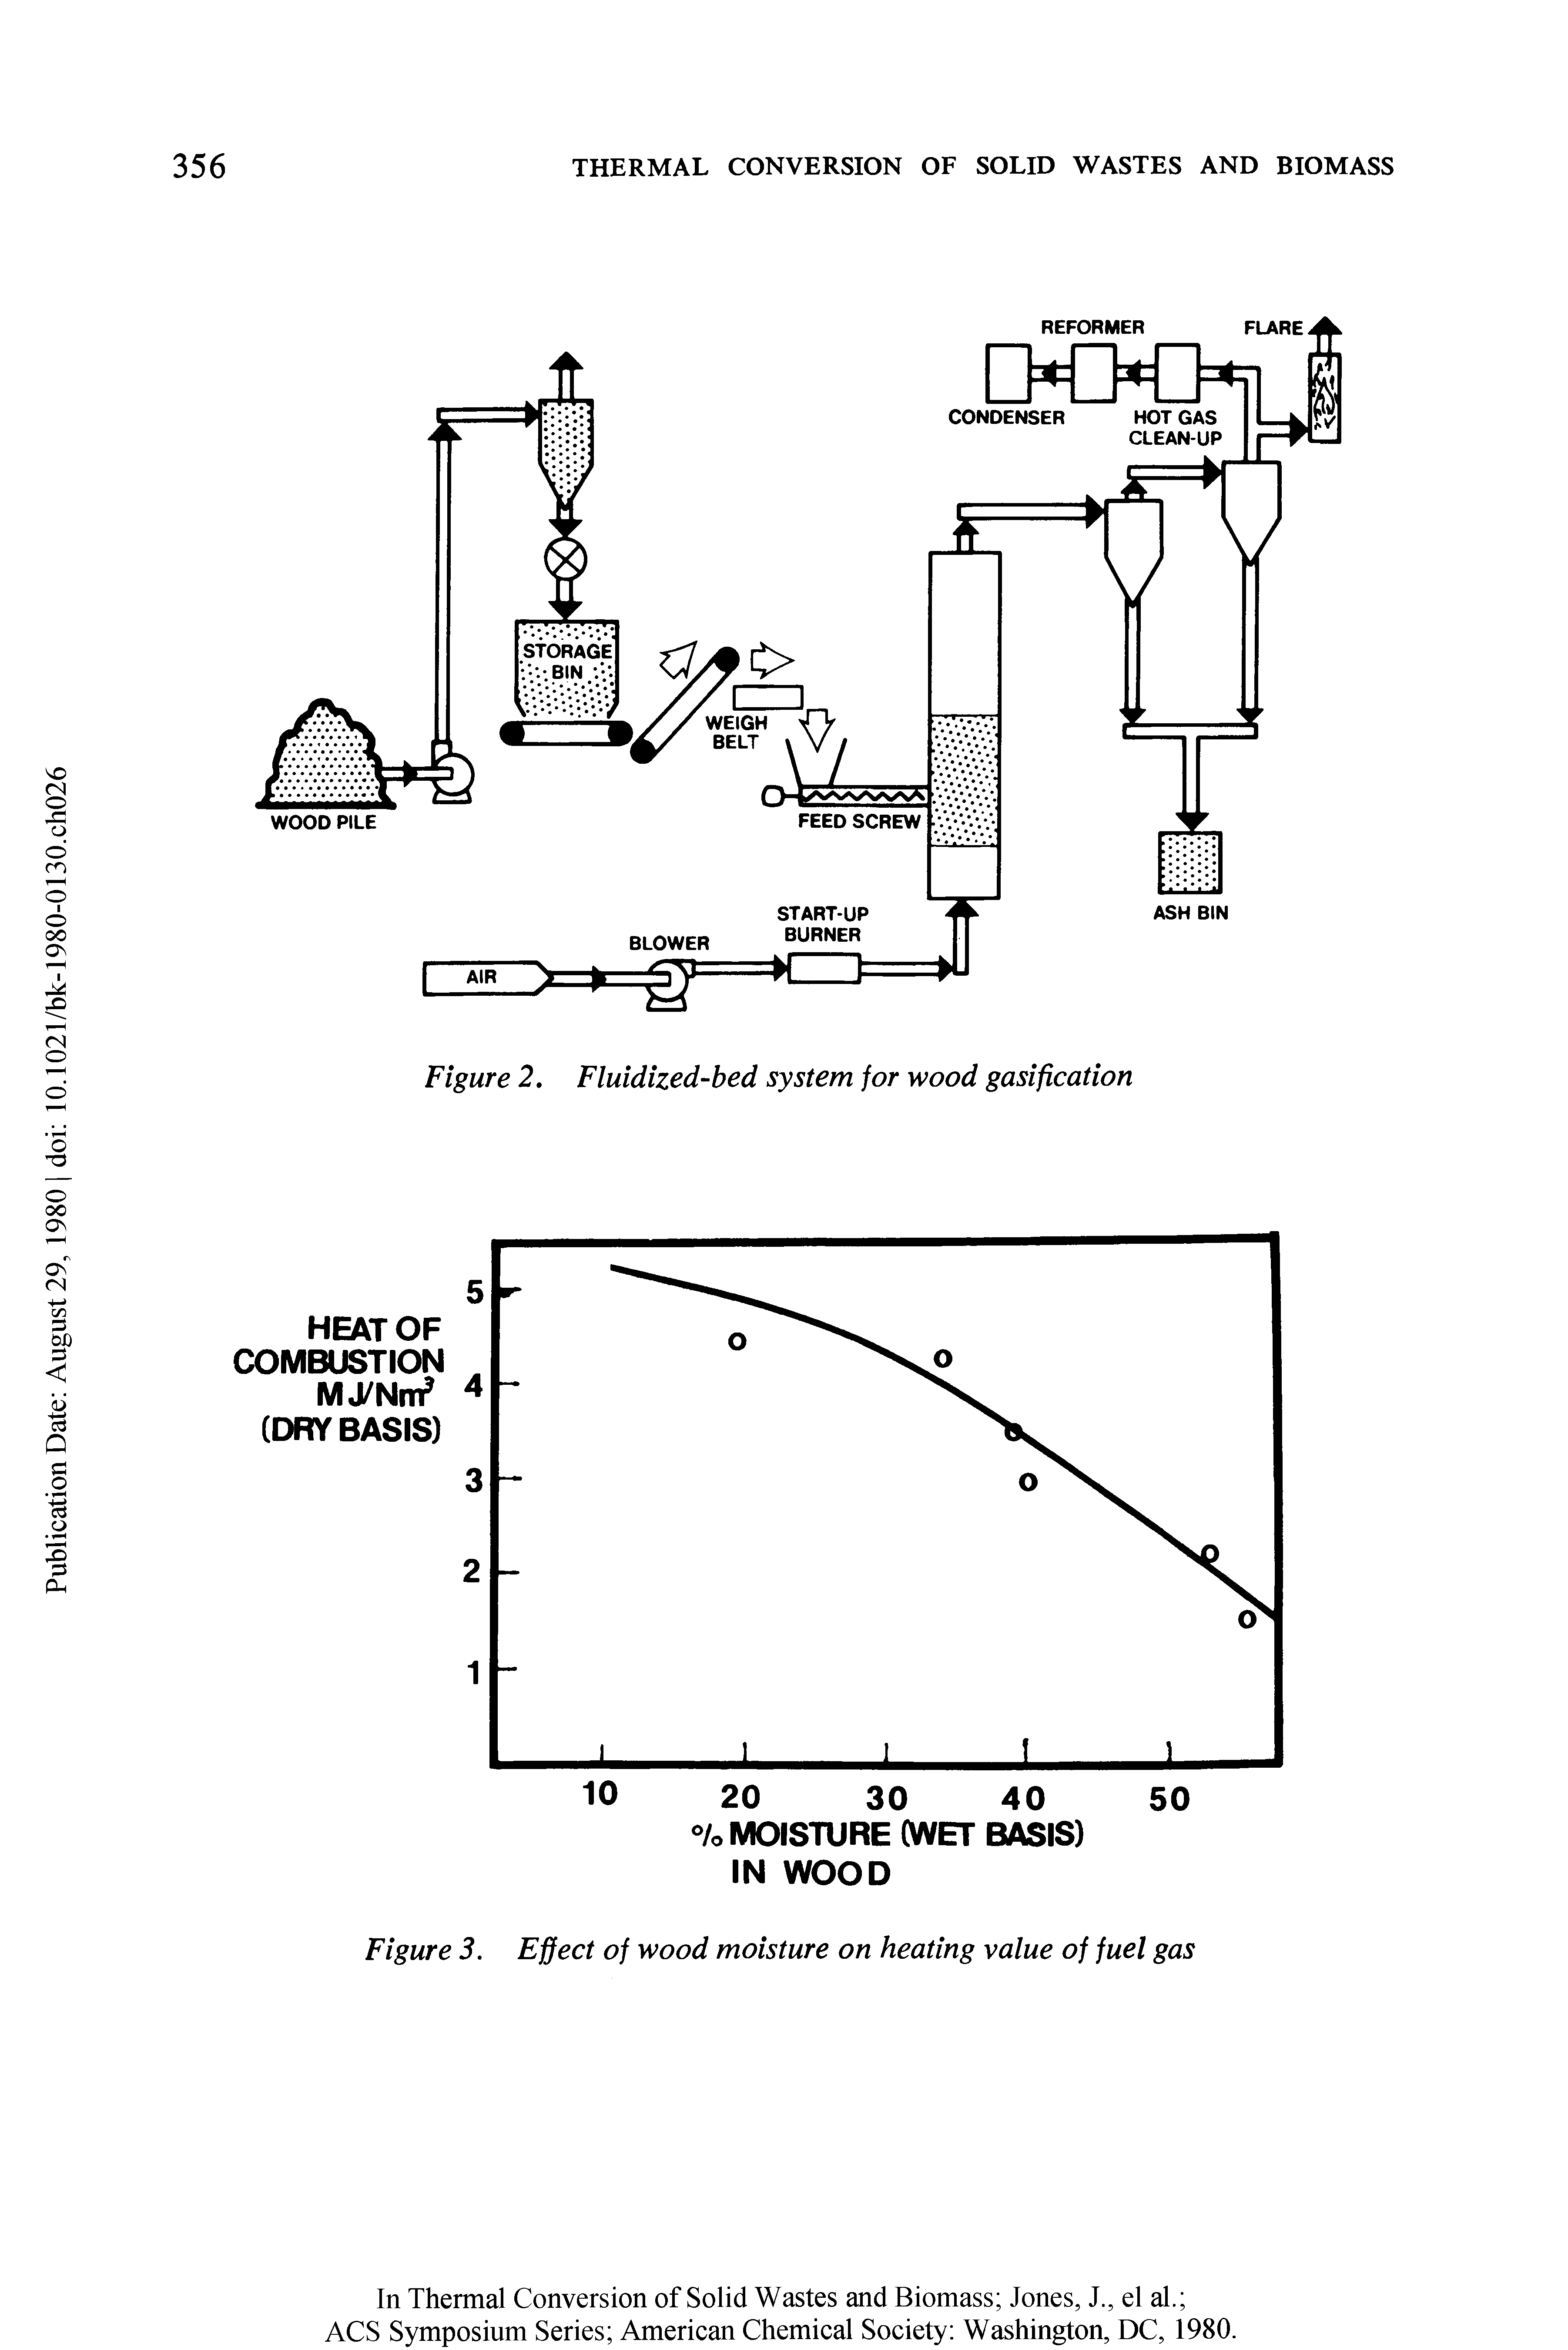 Figure 3. Effect of wood moisture on heating value of fuel gas...